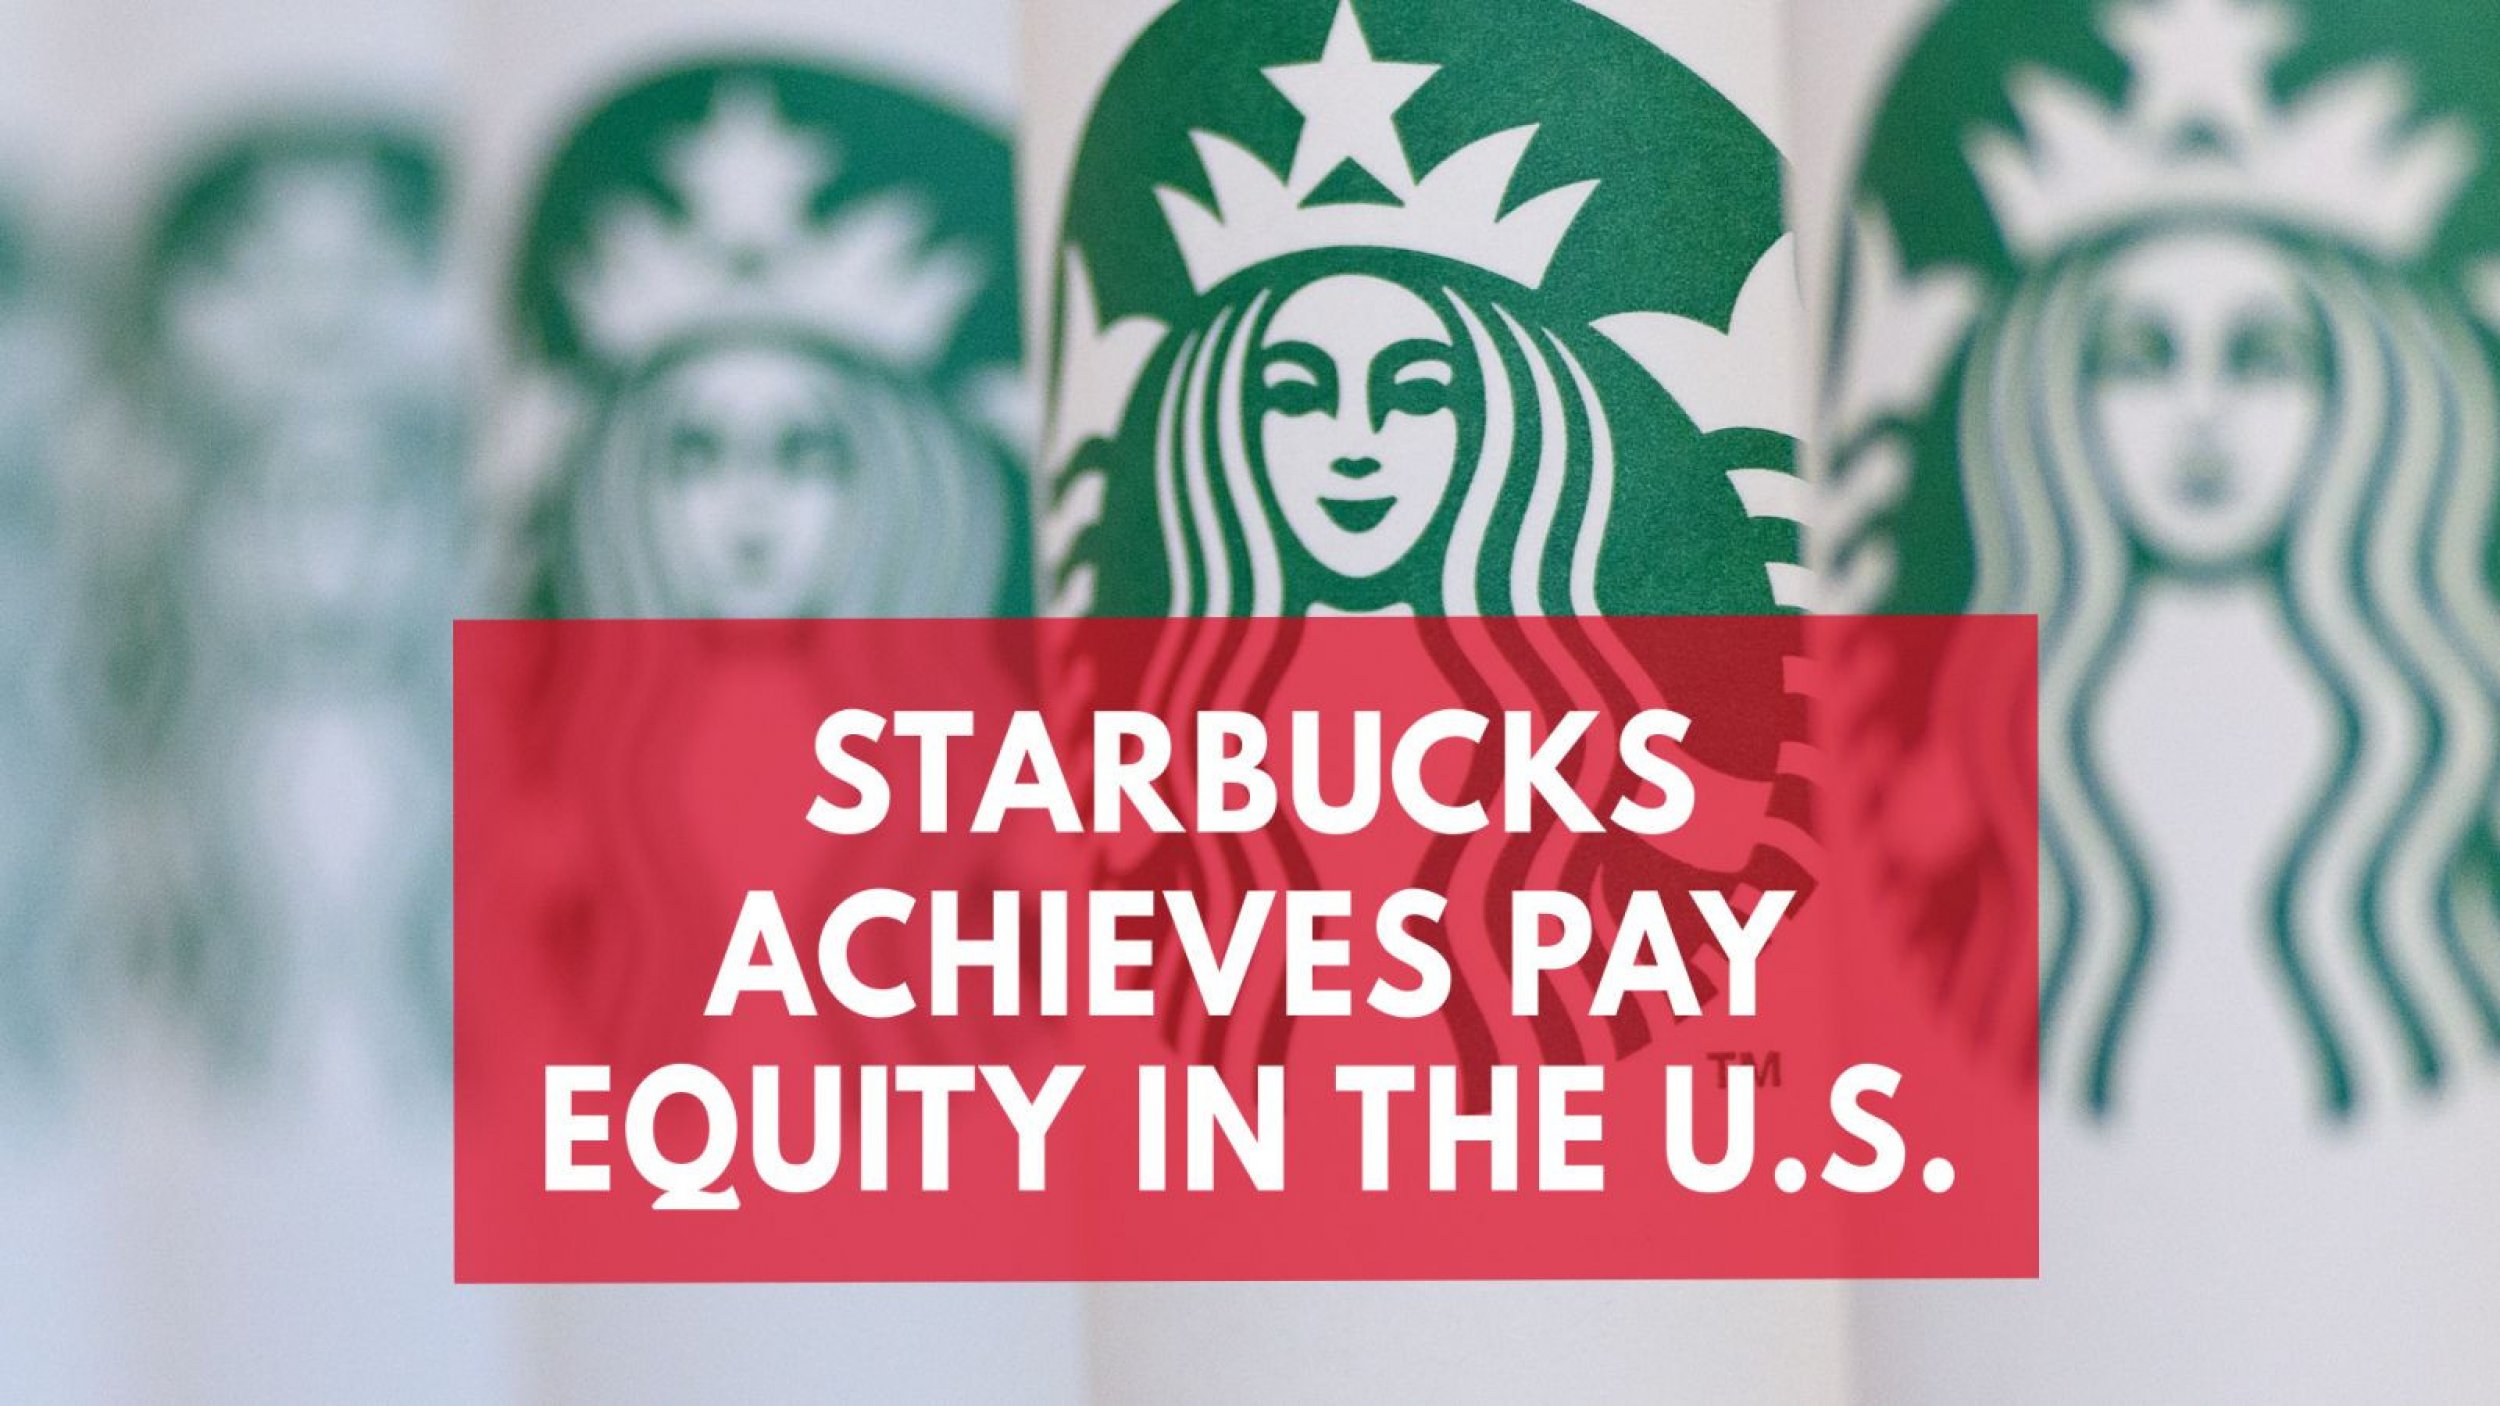 Starbucks Has Achieved Pay Equity In The U.S. 